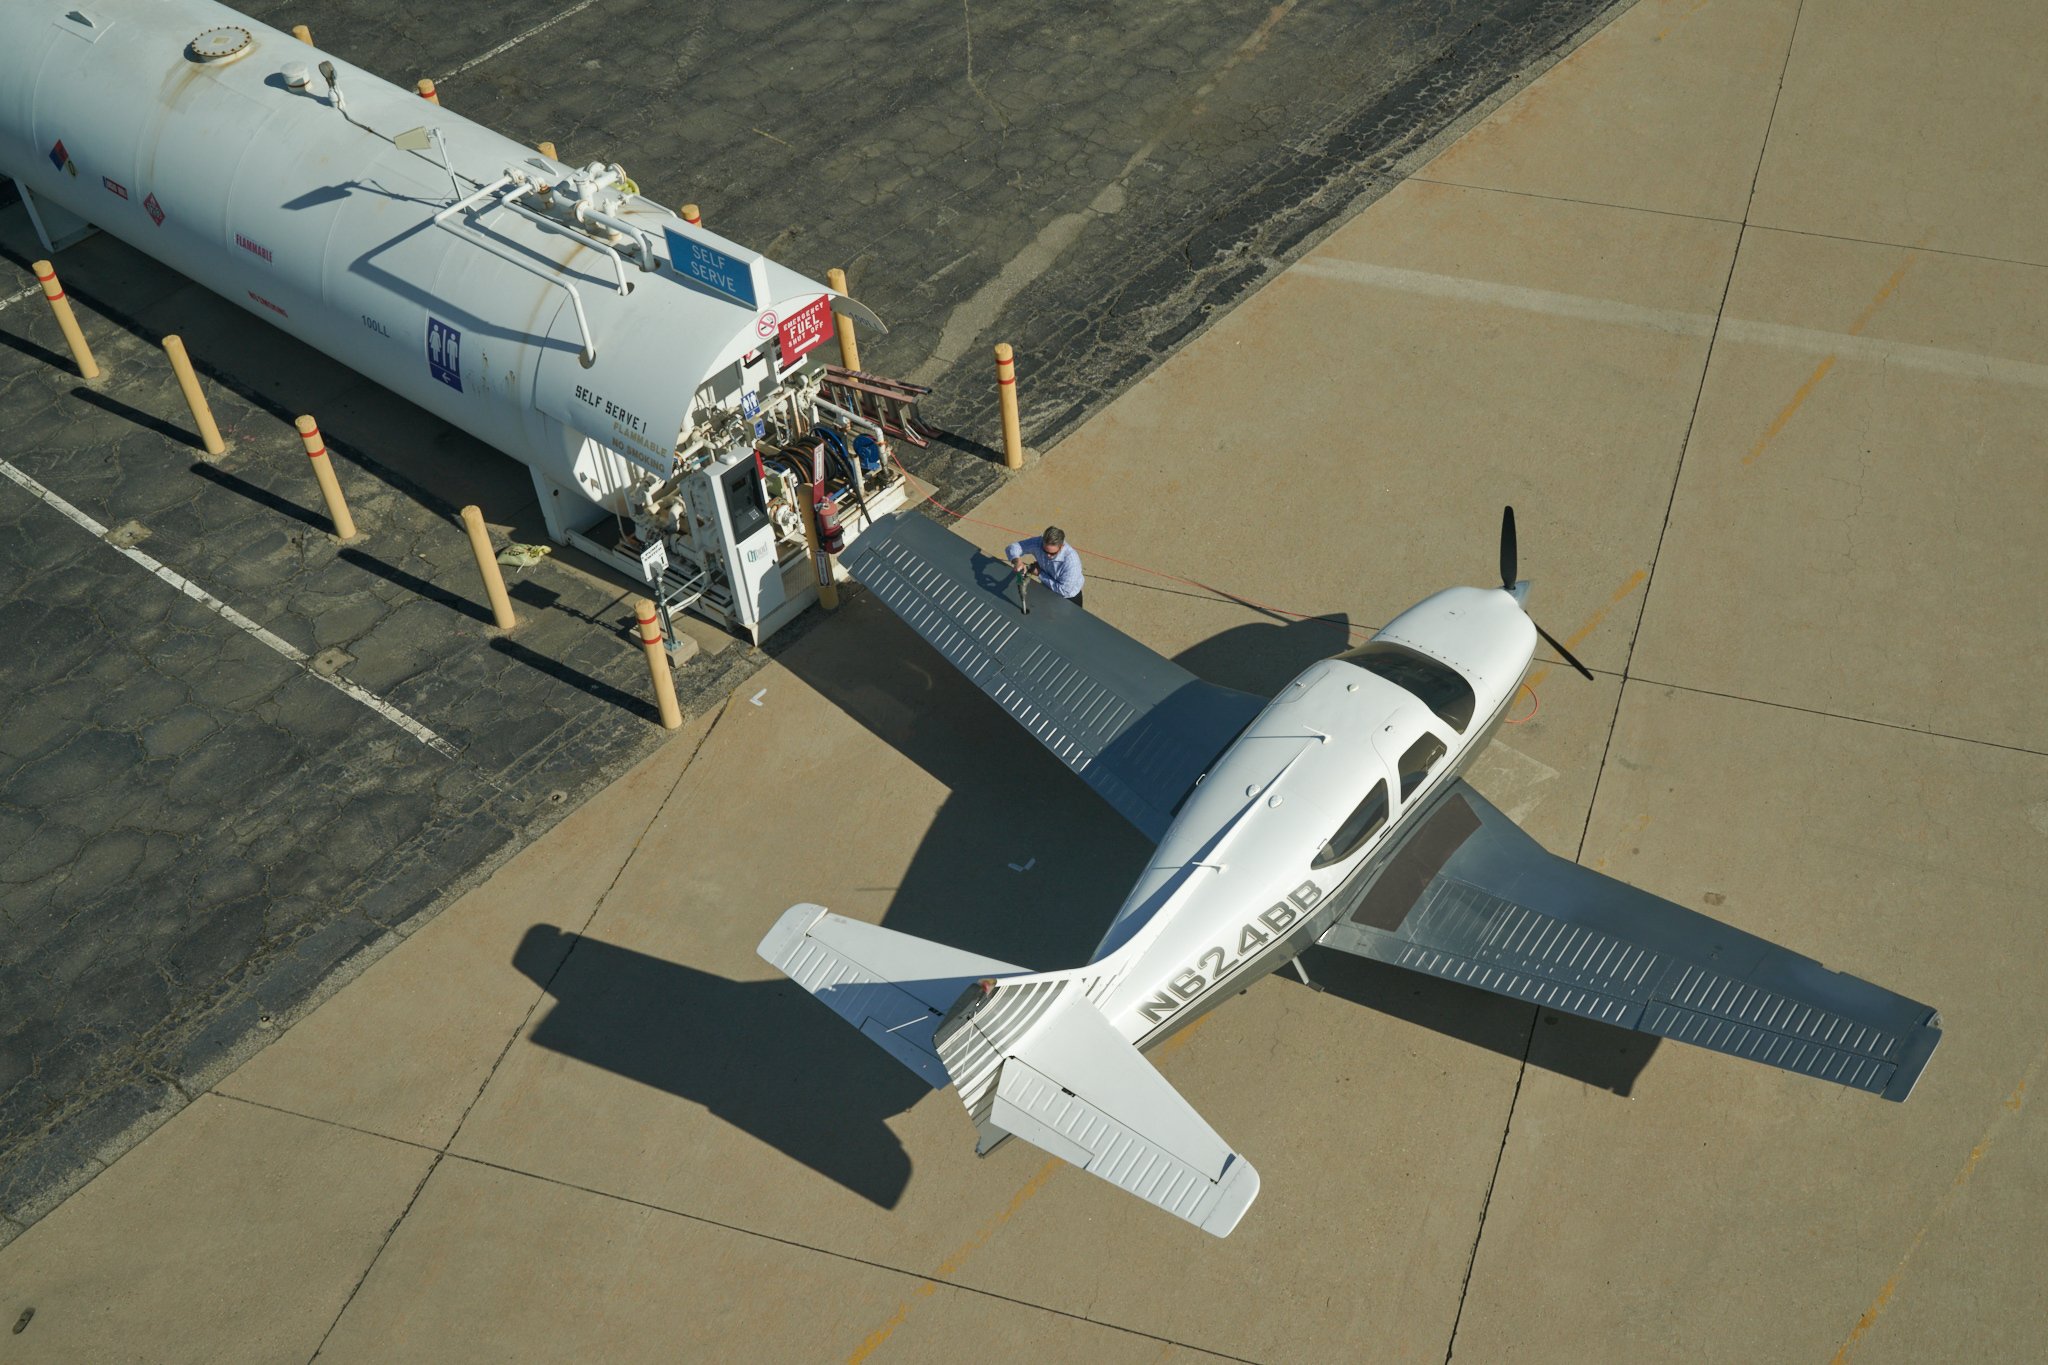 Image of pilot fueling a small single engine plane on the ramp at SBD airport